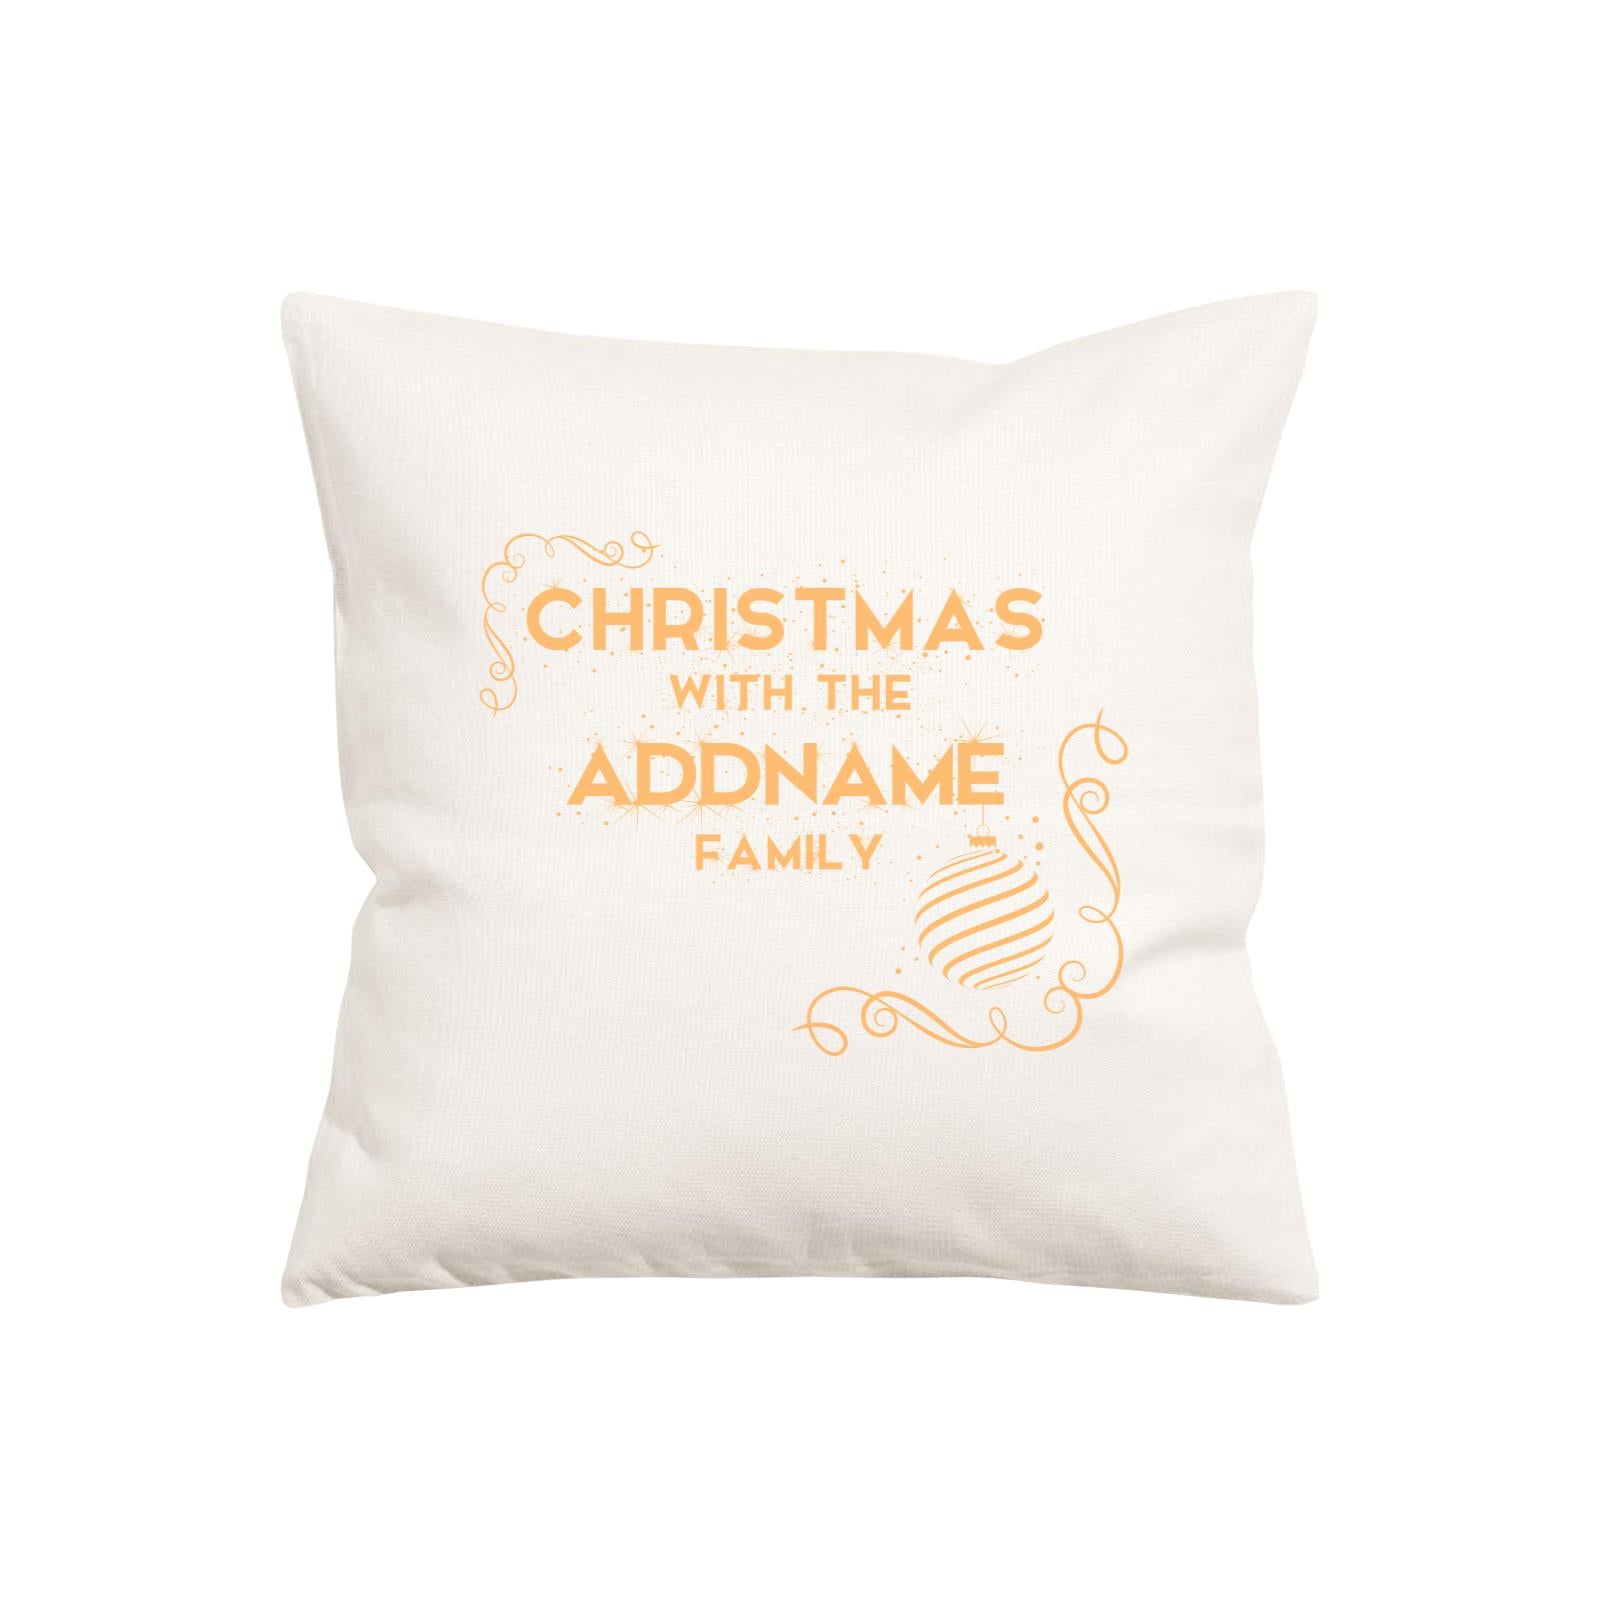 Xmas Christmas with The Family Ornaments Pillow Pillow Cushion